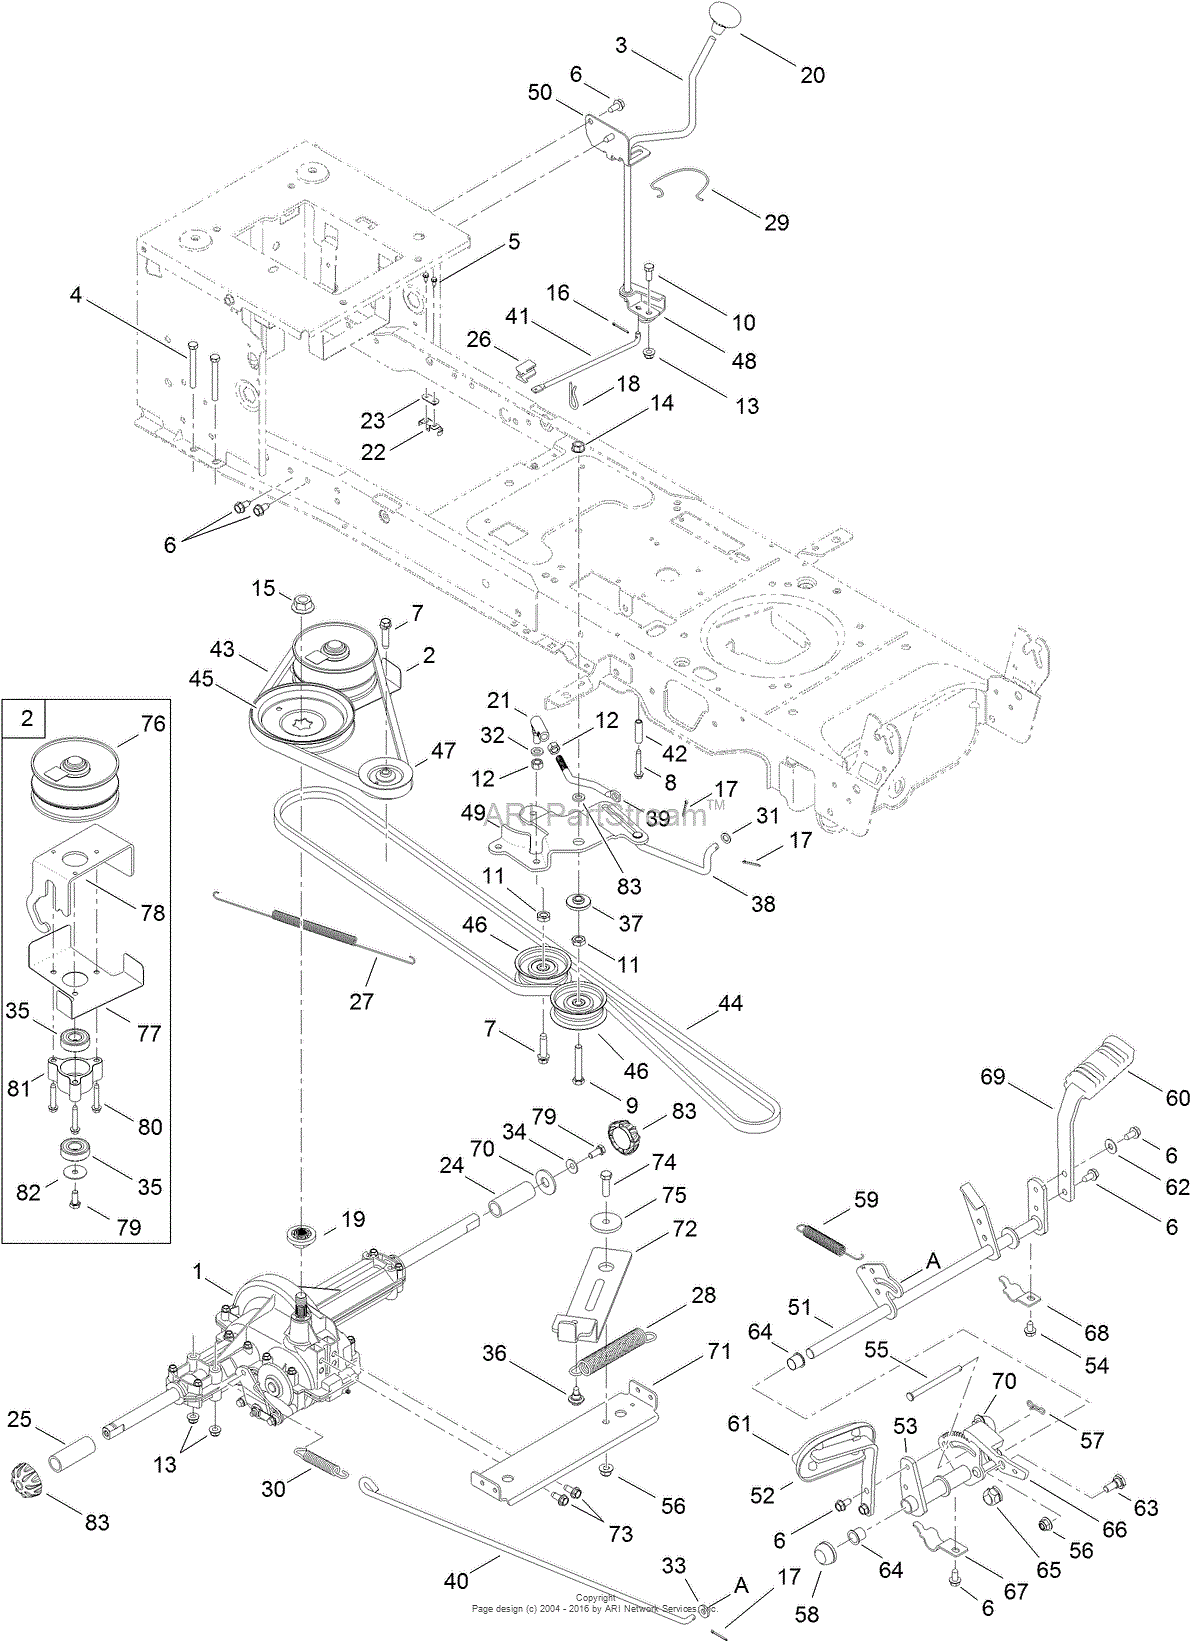 Toro 13ax90rs848 Lx423 Lawn Tractor 2012 Sn 1 1 Parts Diagram For Transmission Belt And Drive Assembly